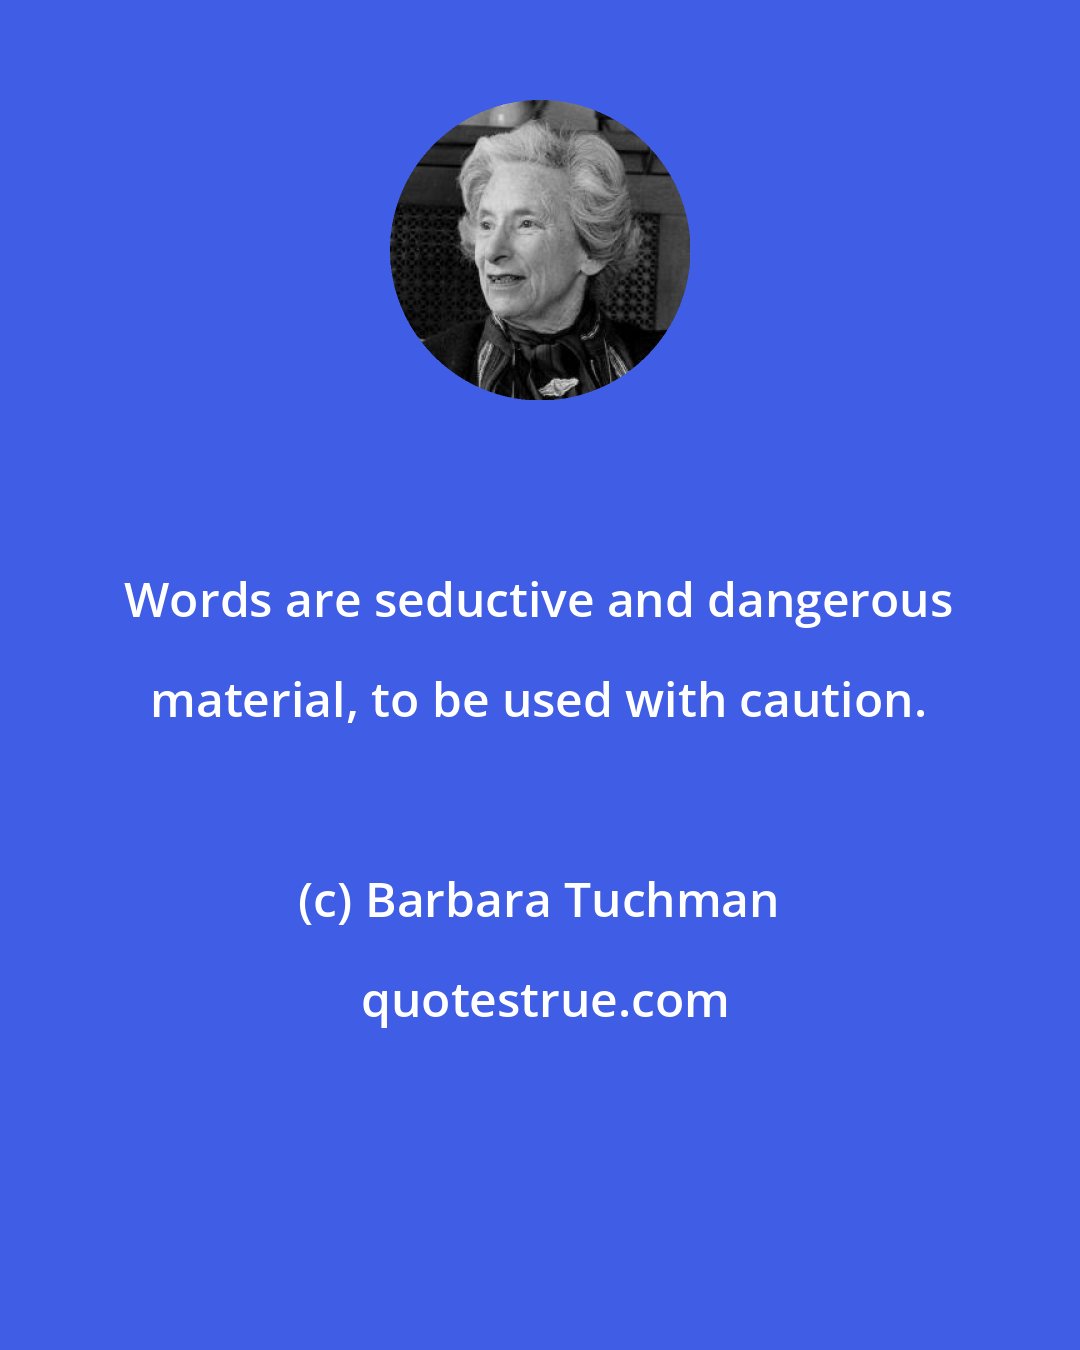 Barbara Tuchman: Words are seductive and dangerous material, to be used with caution.